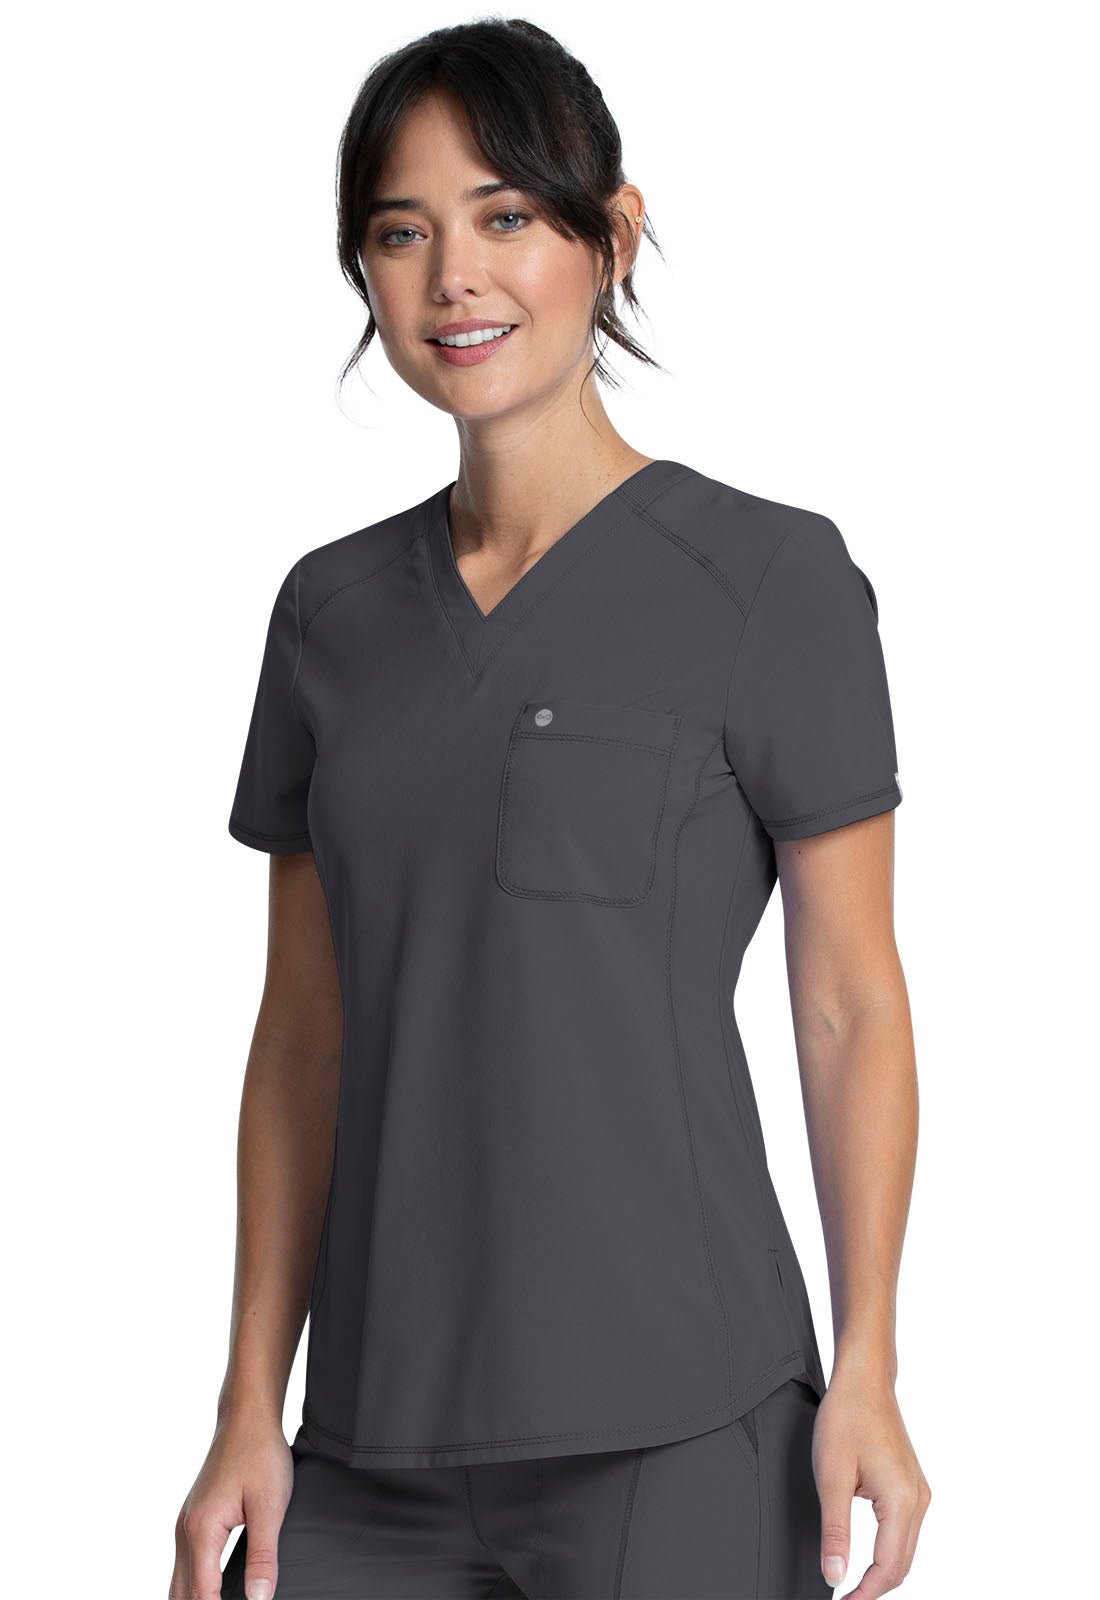 Pewter Infinity Scrubs Tuckable V-Neck Top- Left Side View